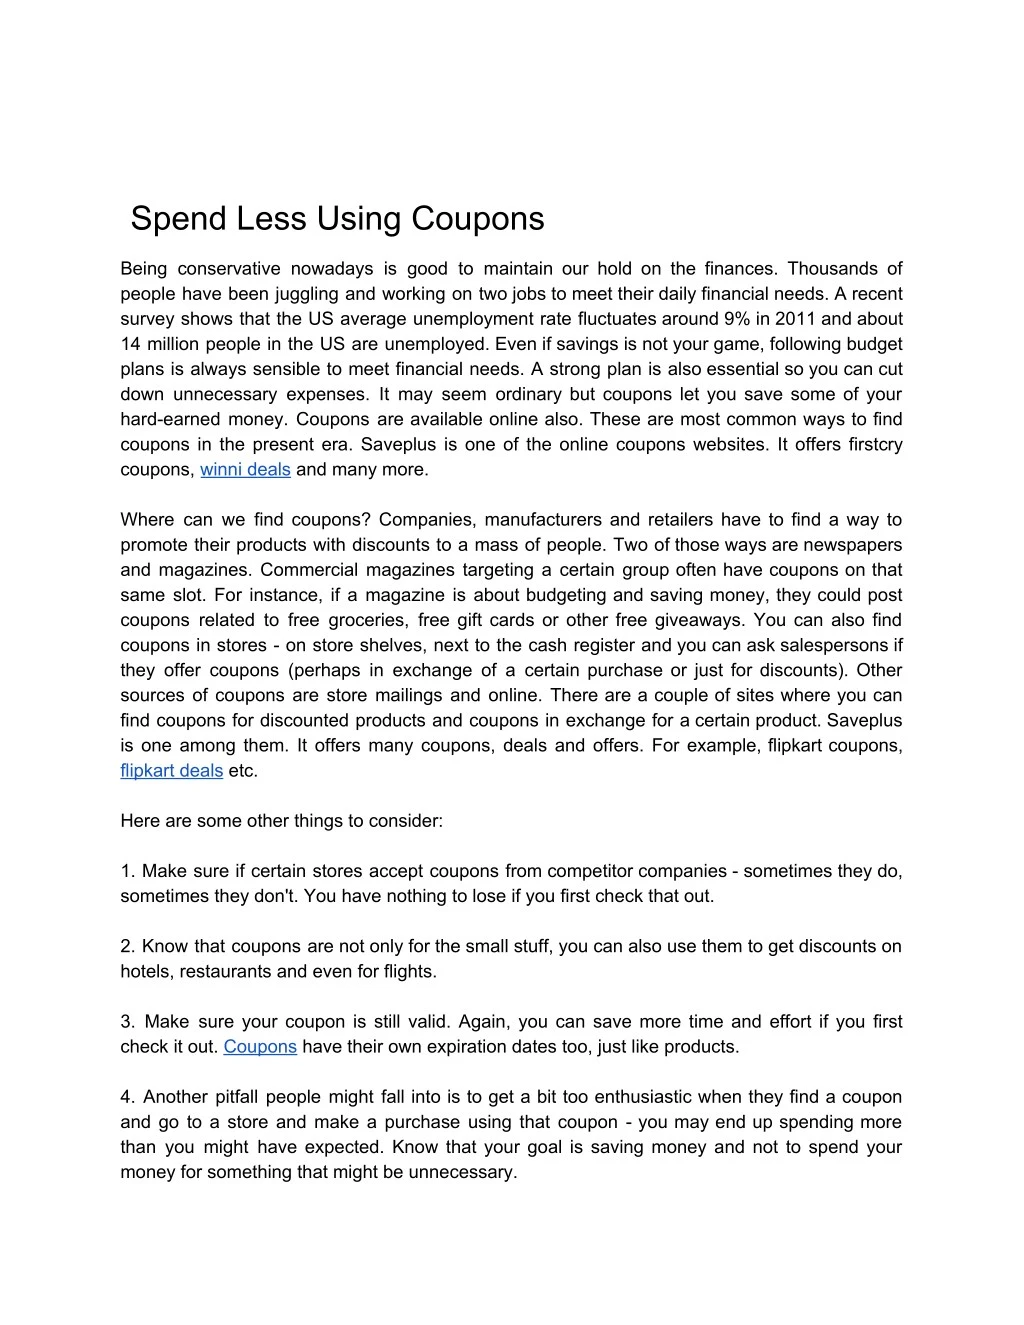 spend less using coupons